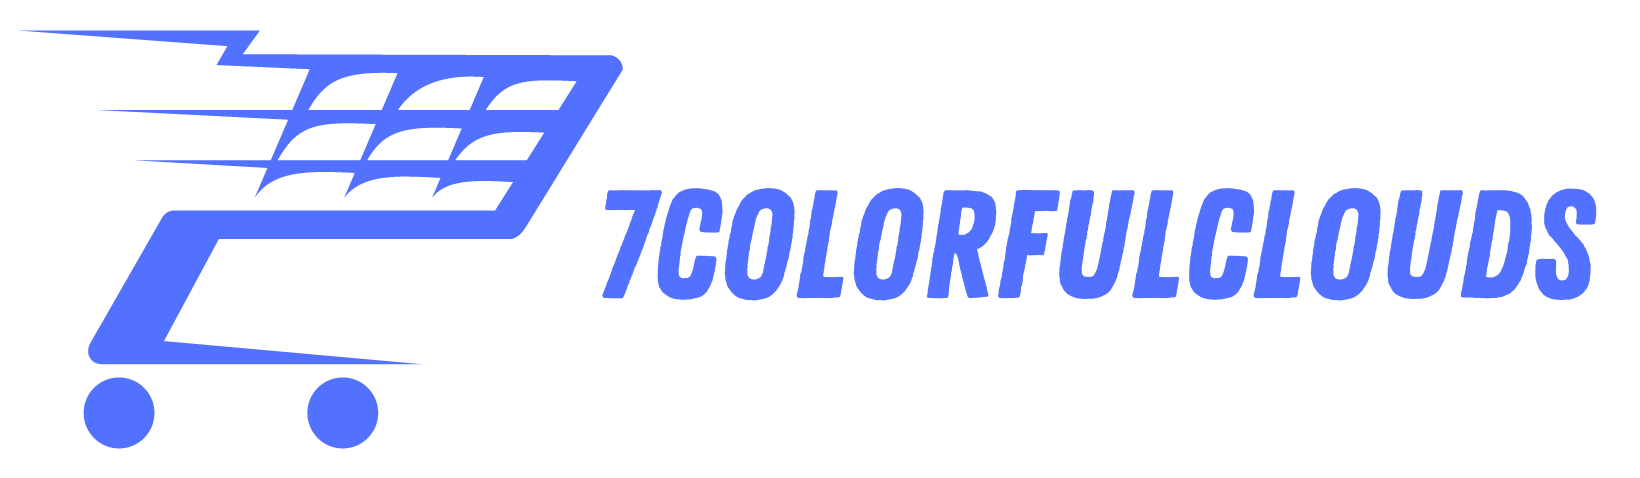 7colorfulclouds